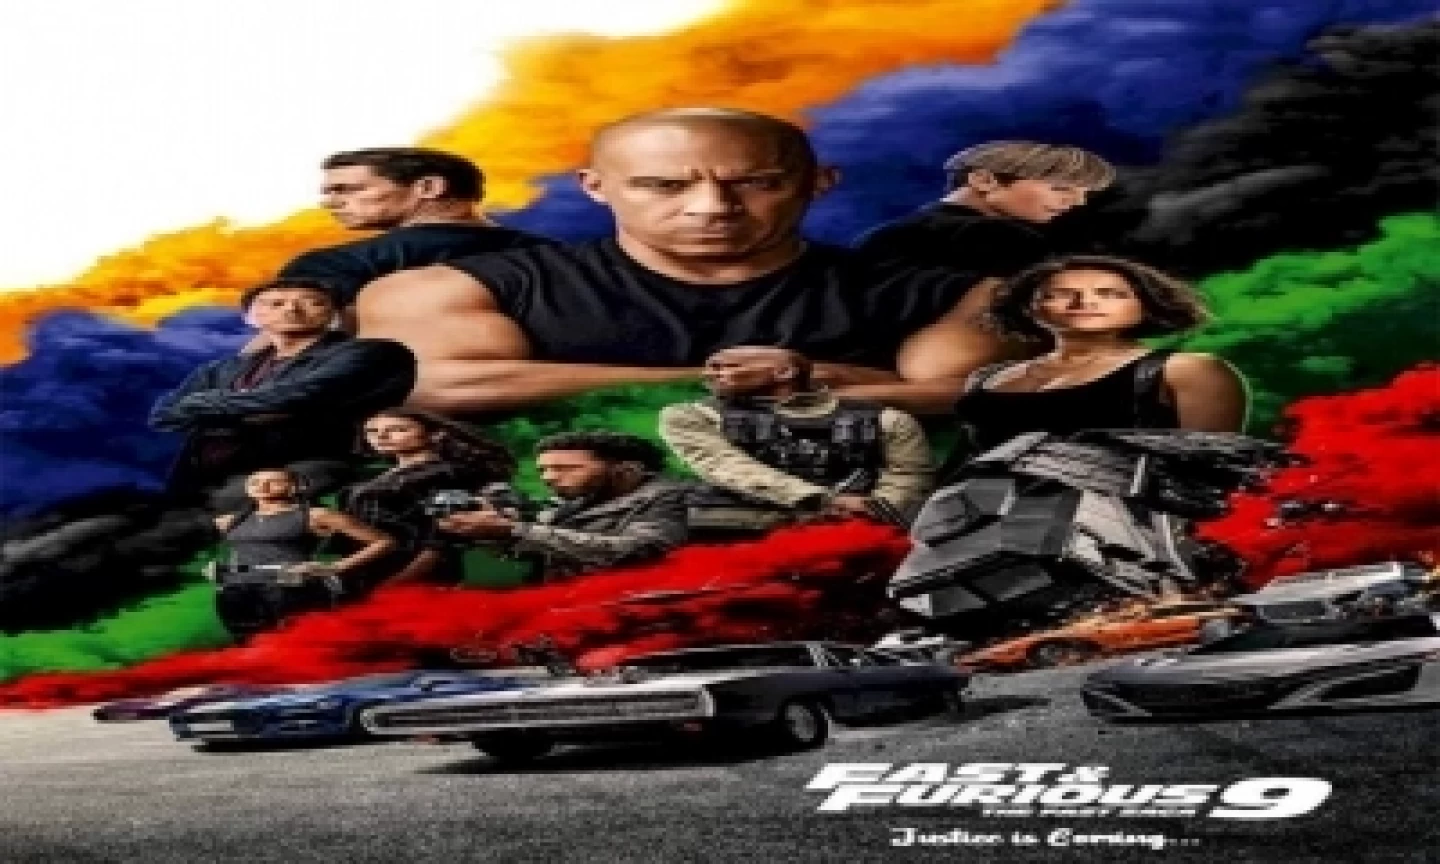 Fast and furious 9 full movie free download